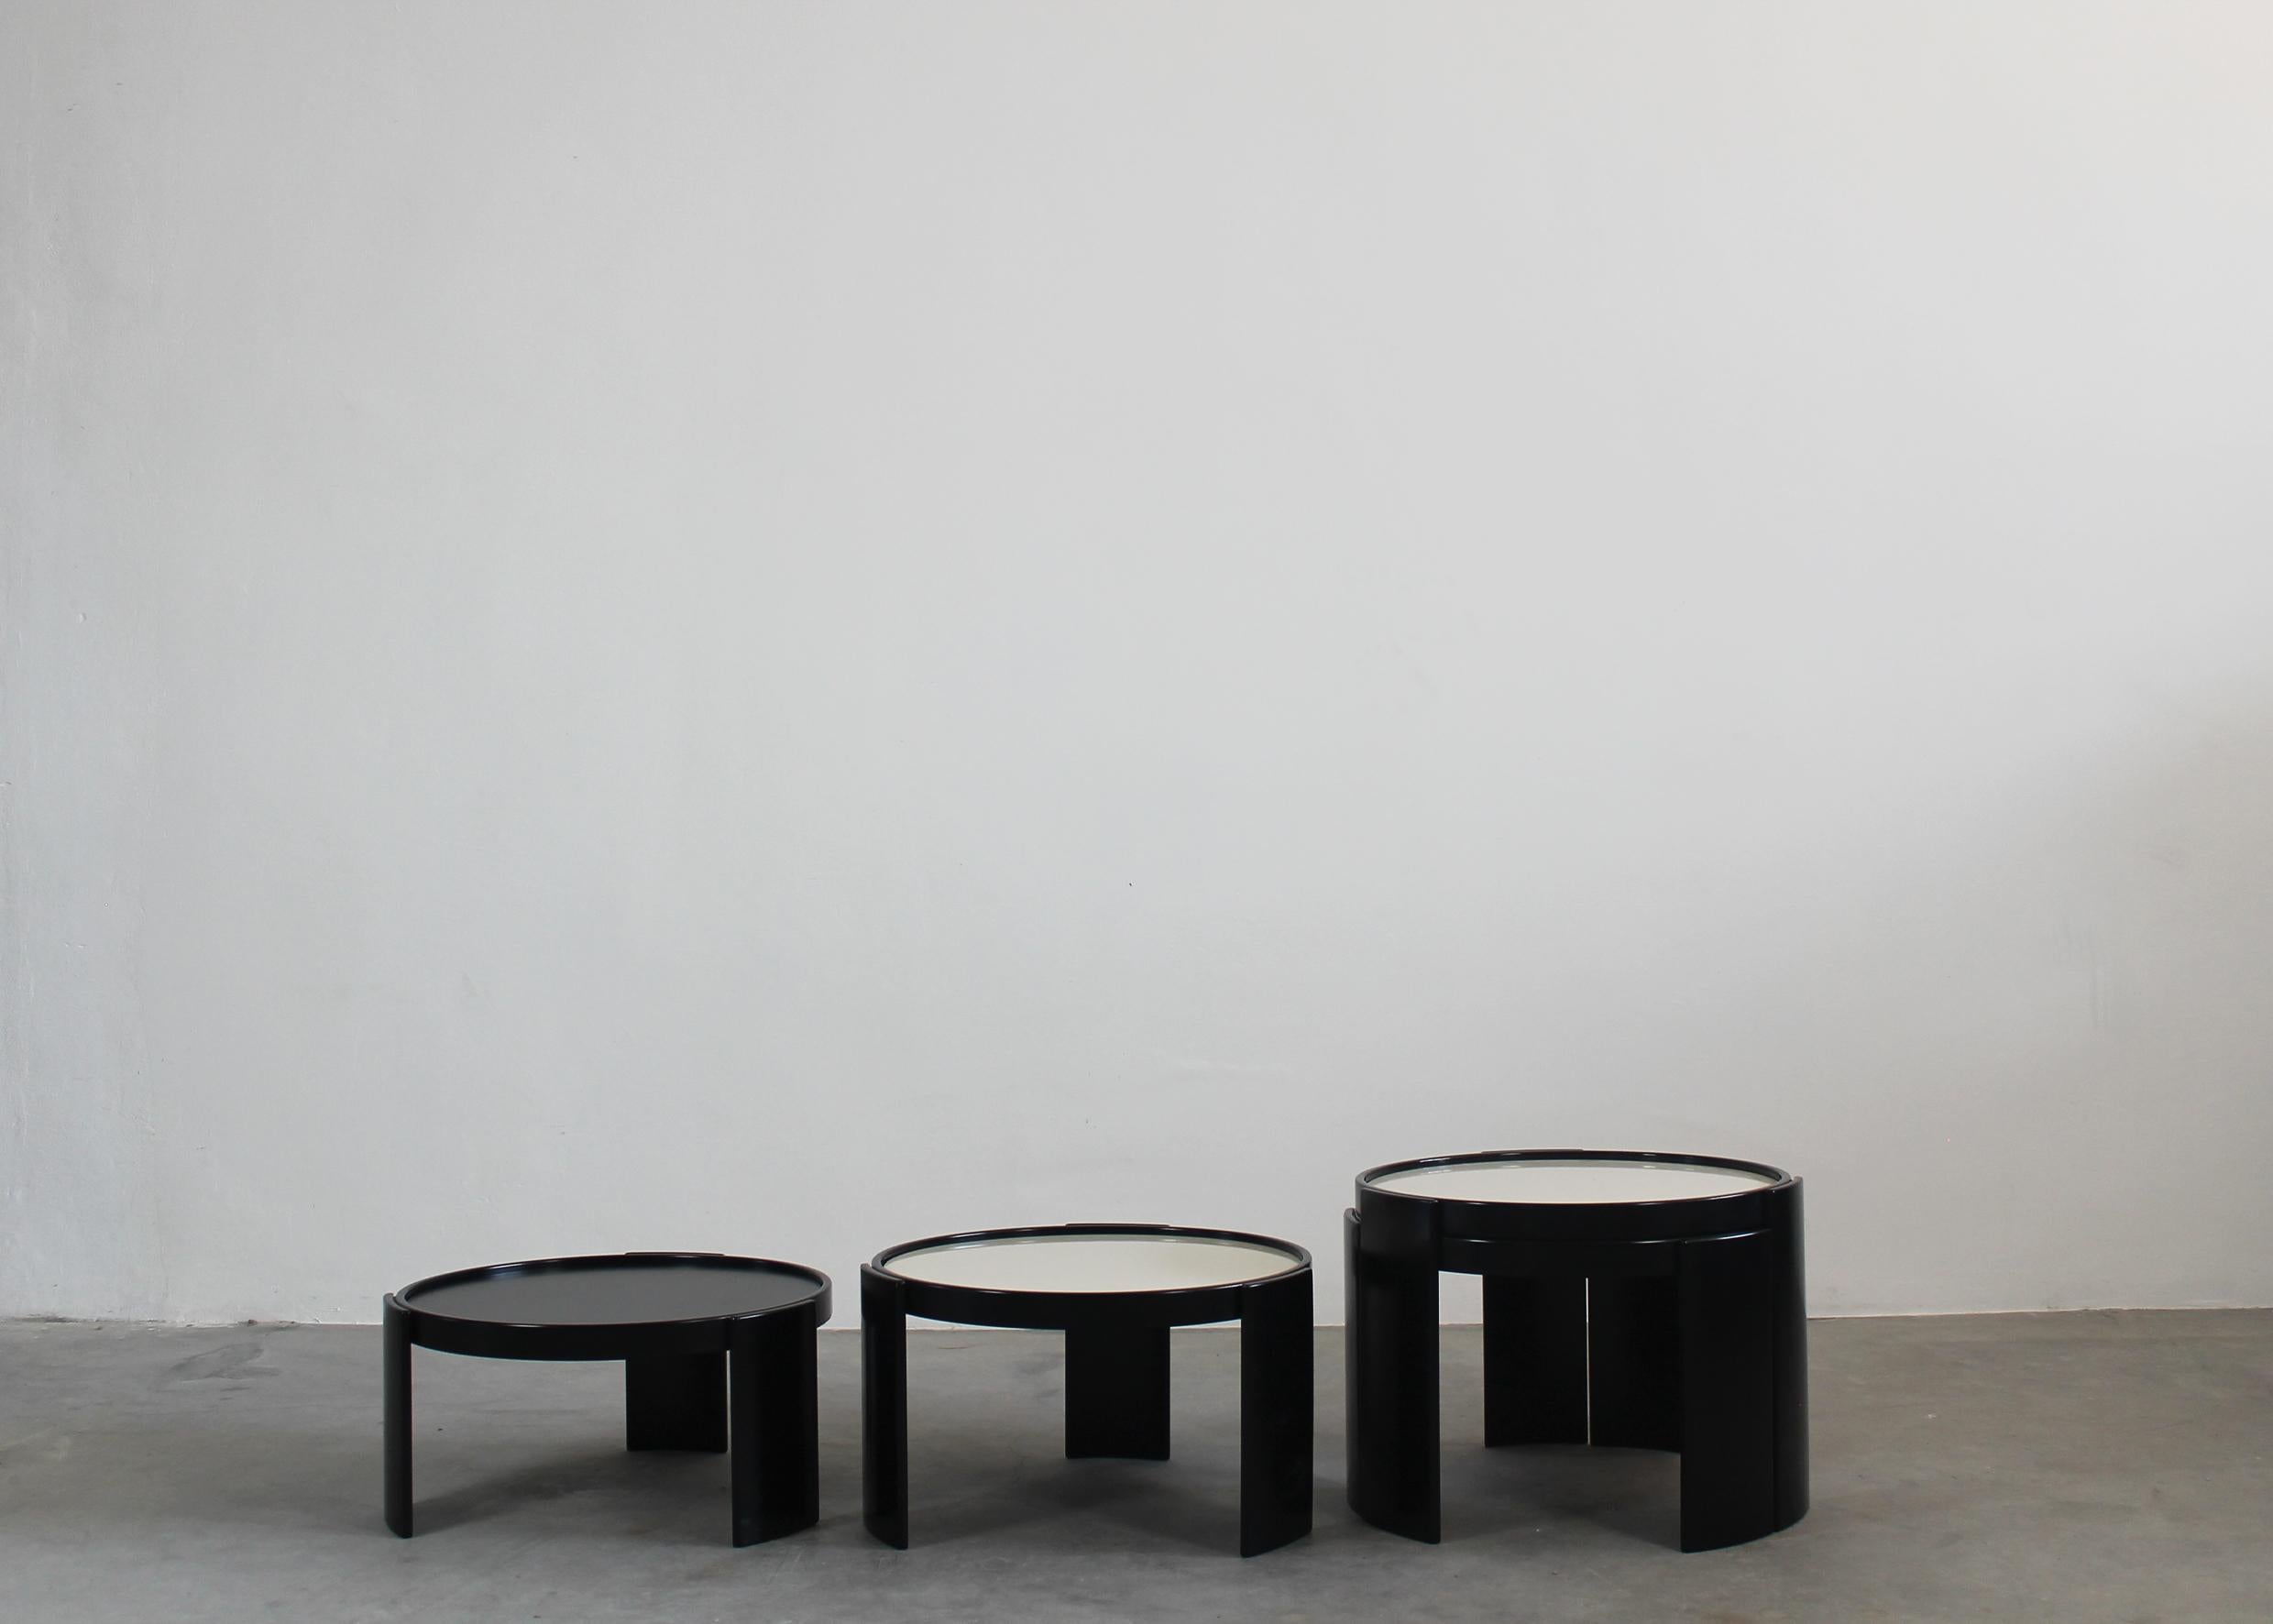 Lacquered Gianfranco Frattini Set of Four 780/783 Stacking Low Tables by Cassina 1960s